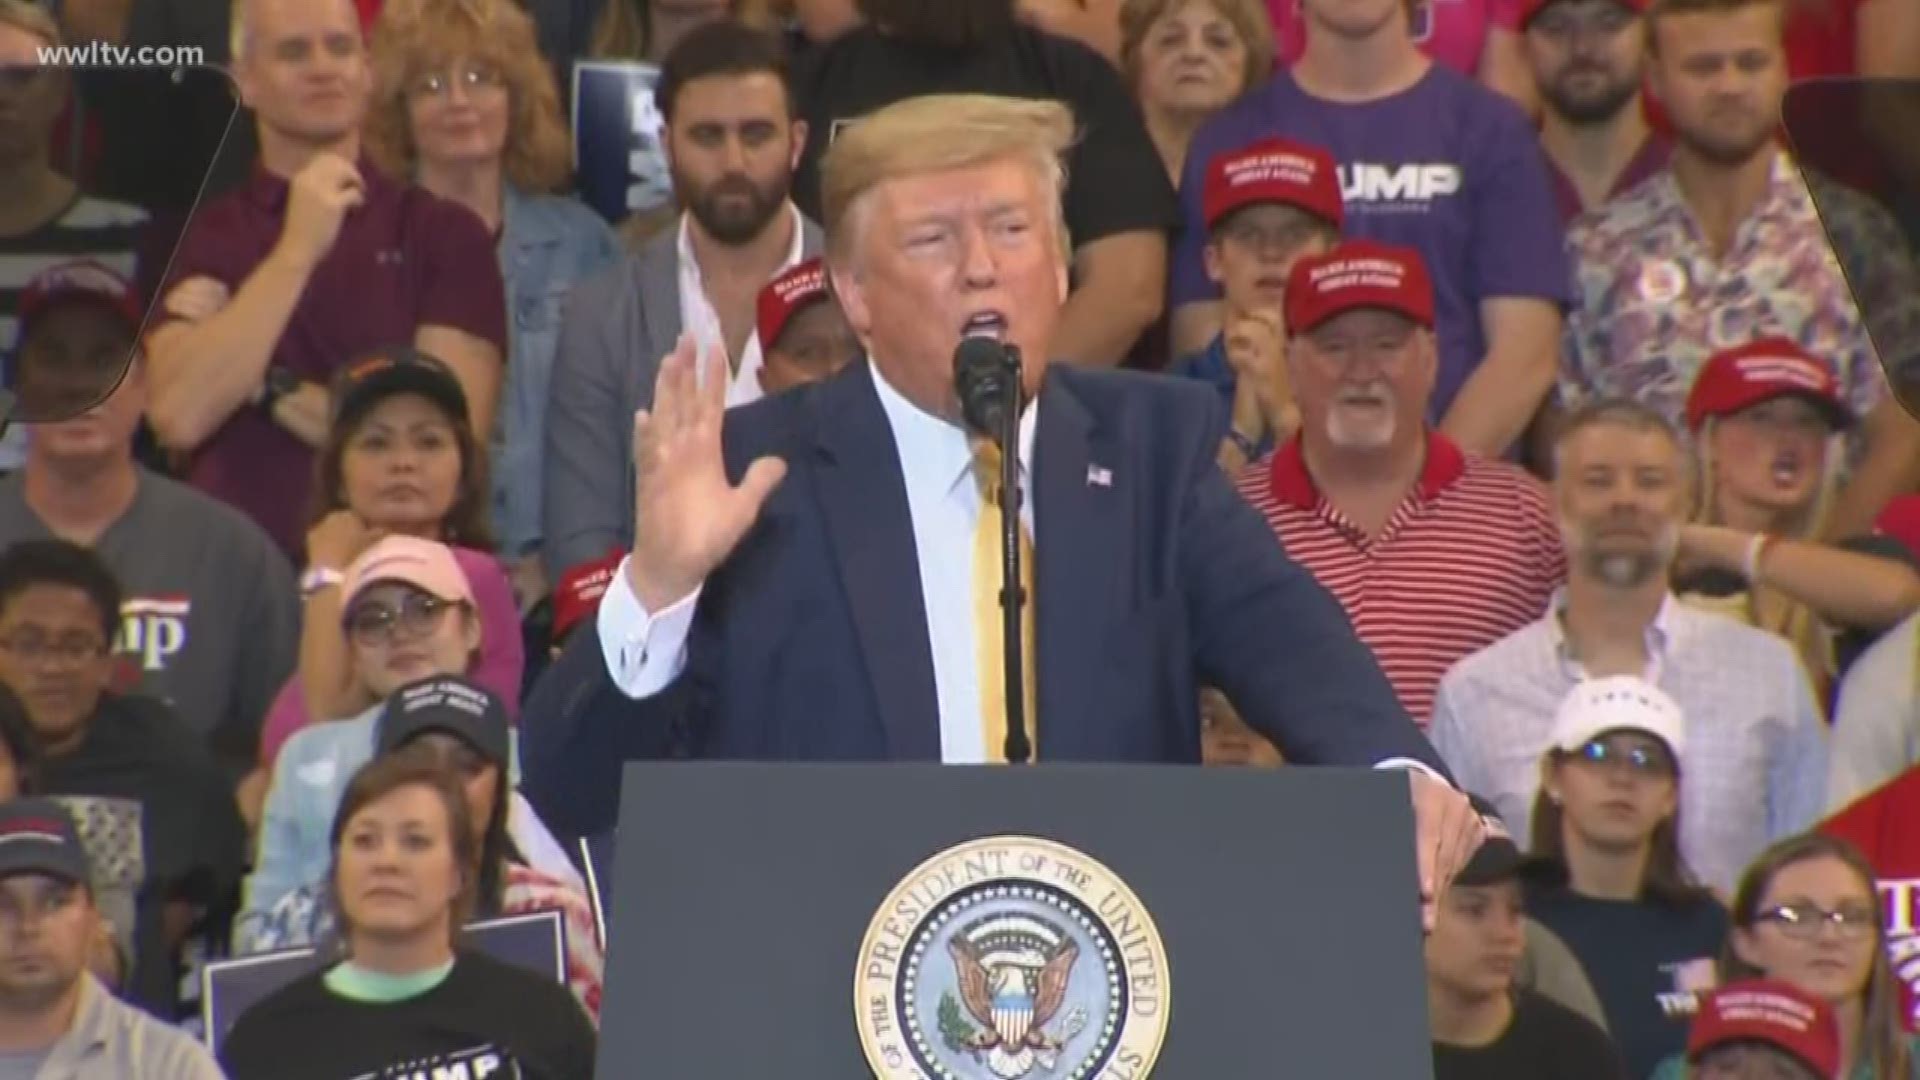 President Trump was in Lake Charles championing for the two GOP contenders for governor, while incumbent Governor Edwards tweeted some replies to the president.